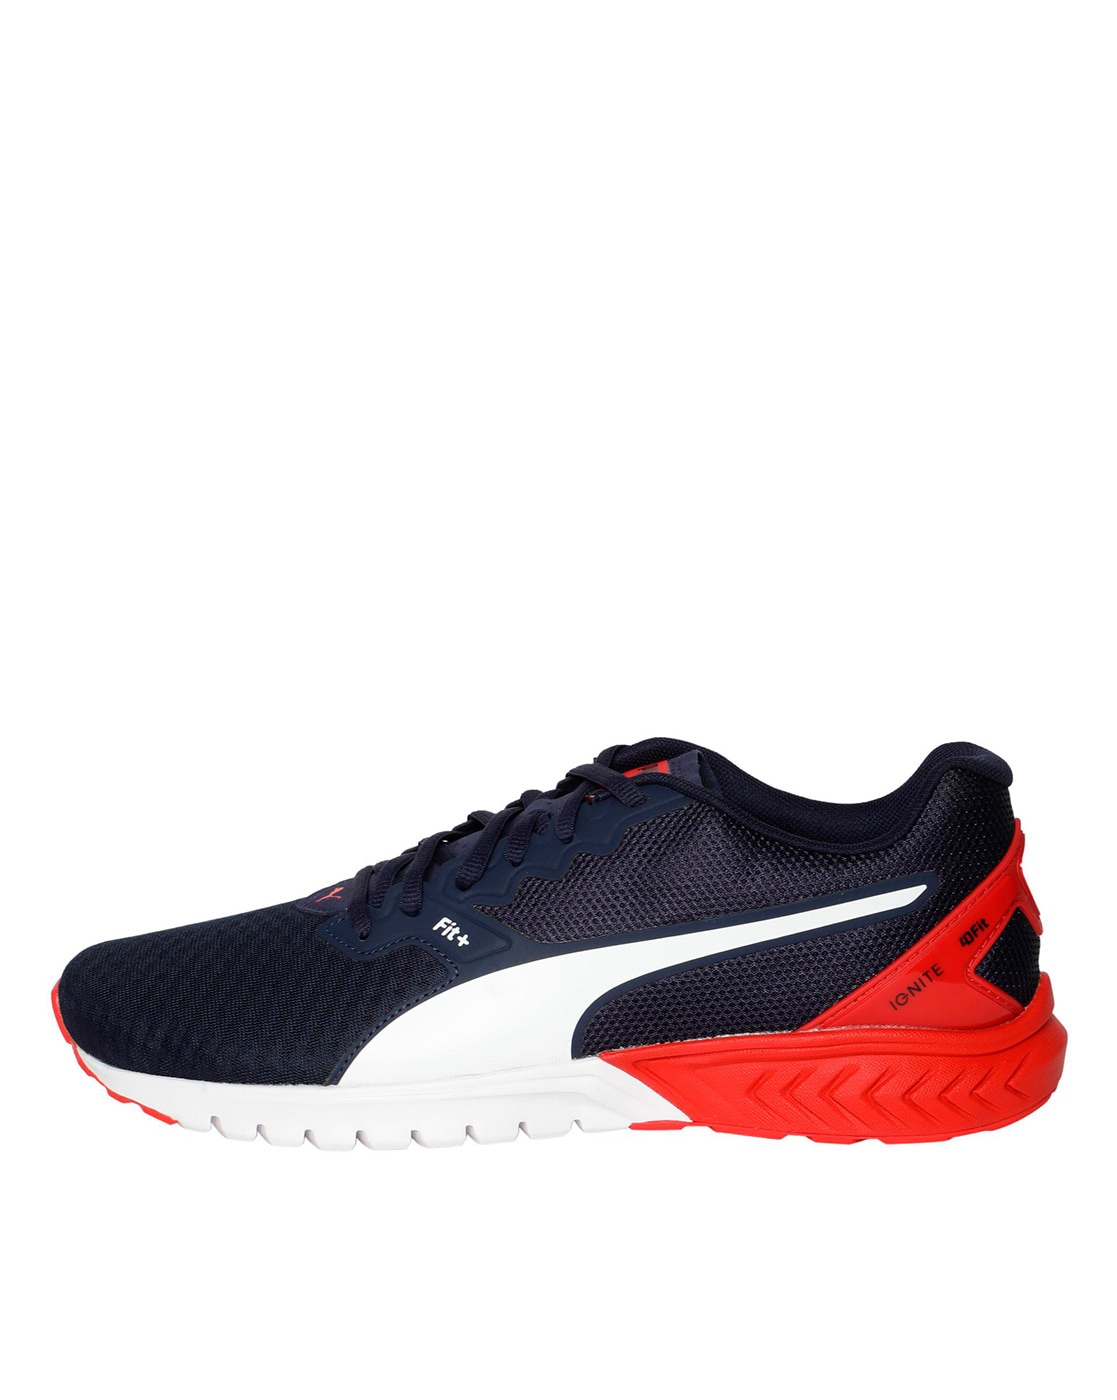 Buy Navy Blue \u0026 Red Sports Shoes for 